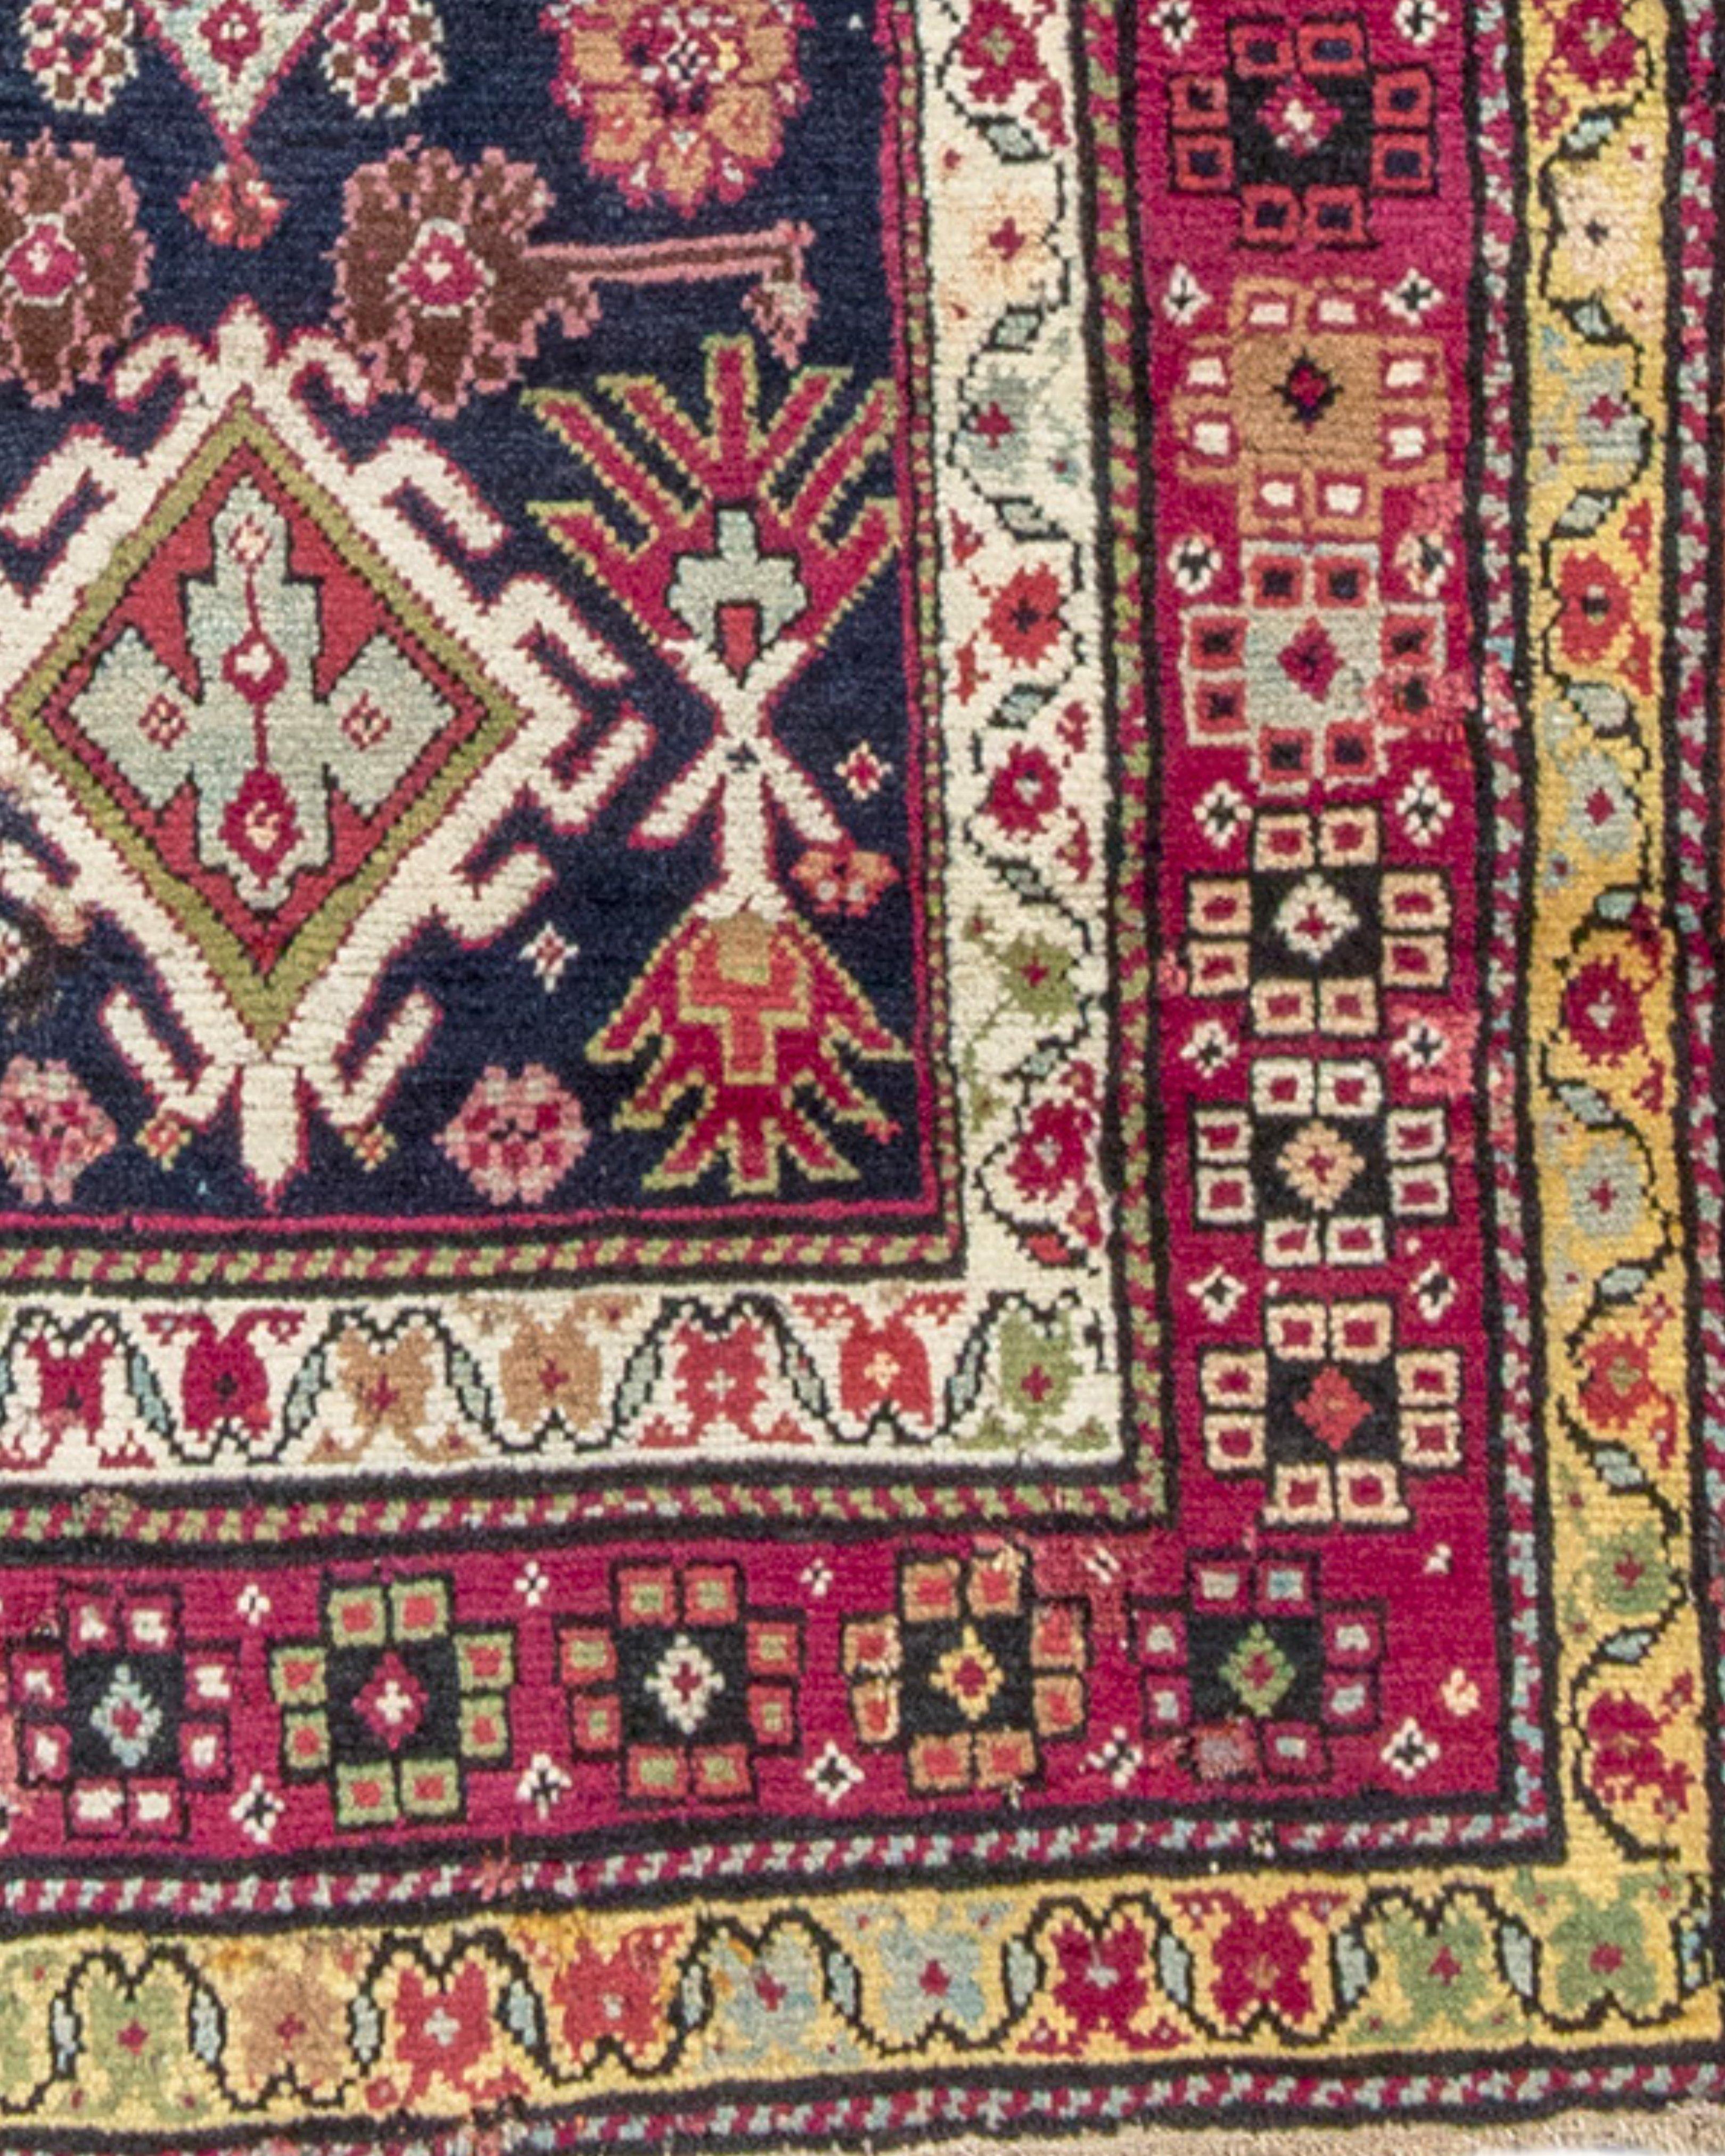 Antique Persian Karabagh Prayer Rug, 19th Century In Good Condition For Sale In San Francisco, CA